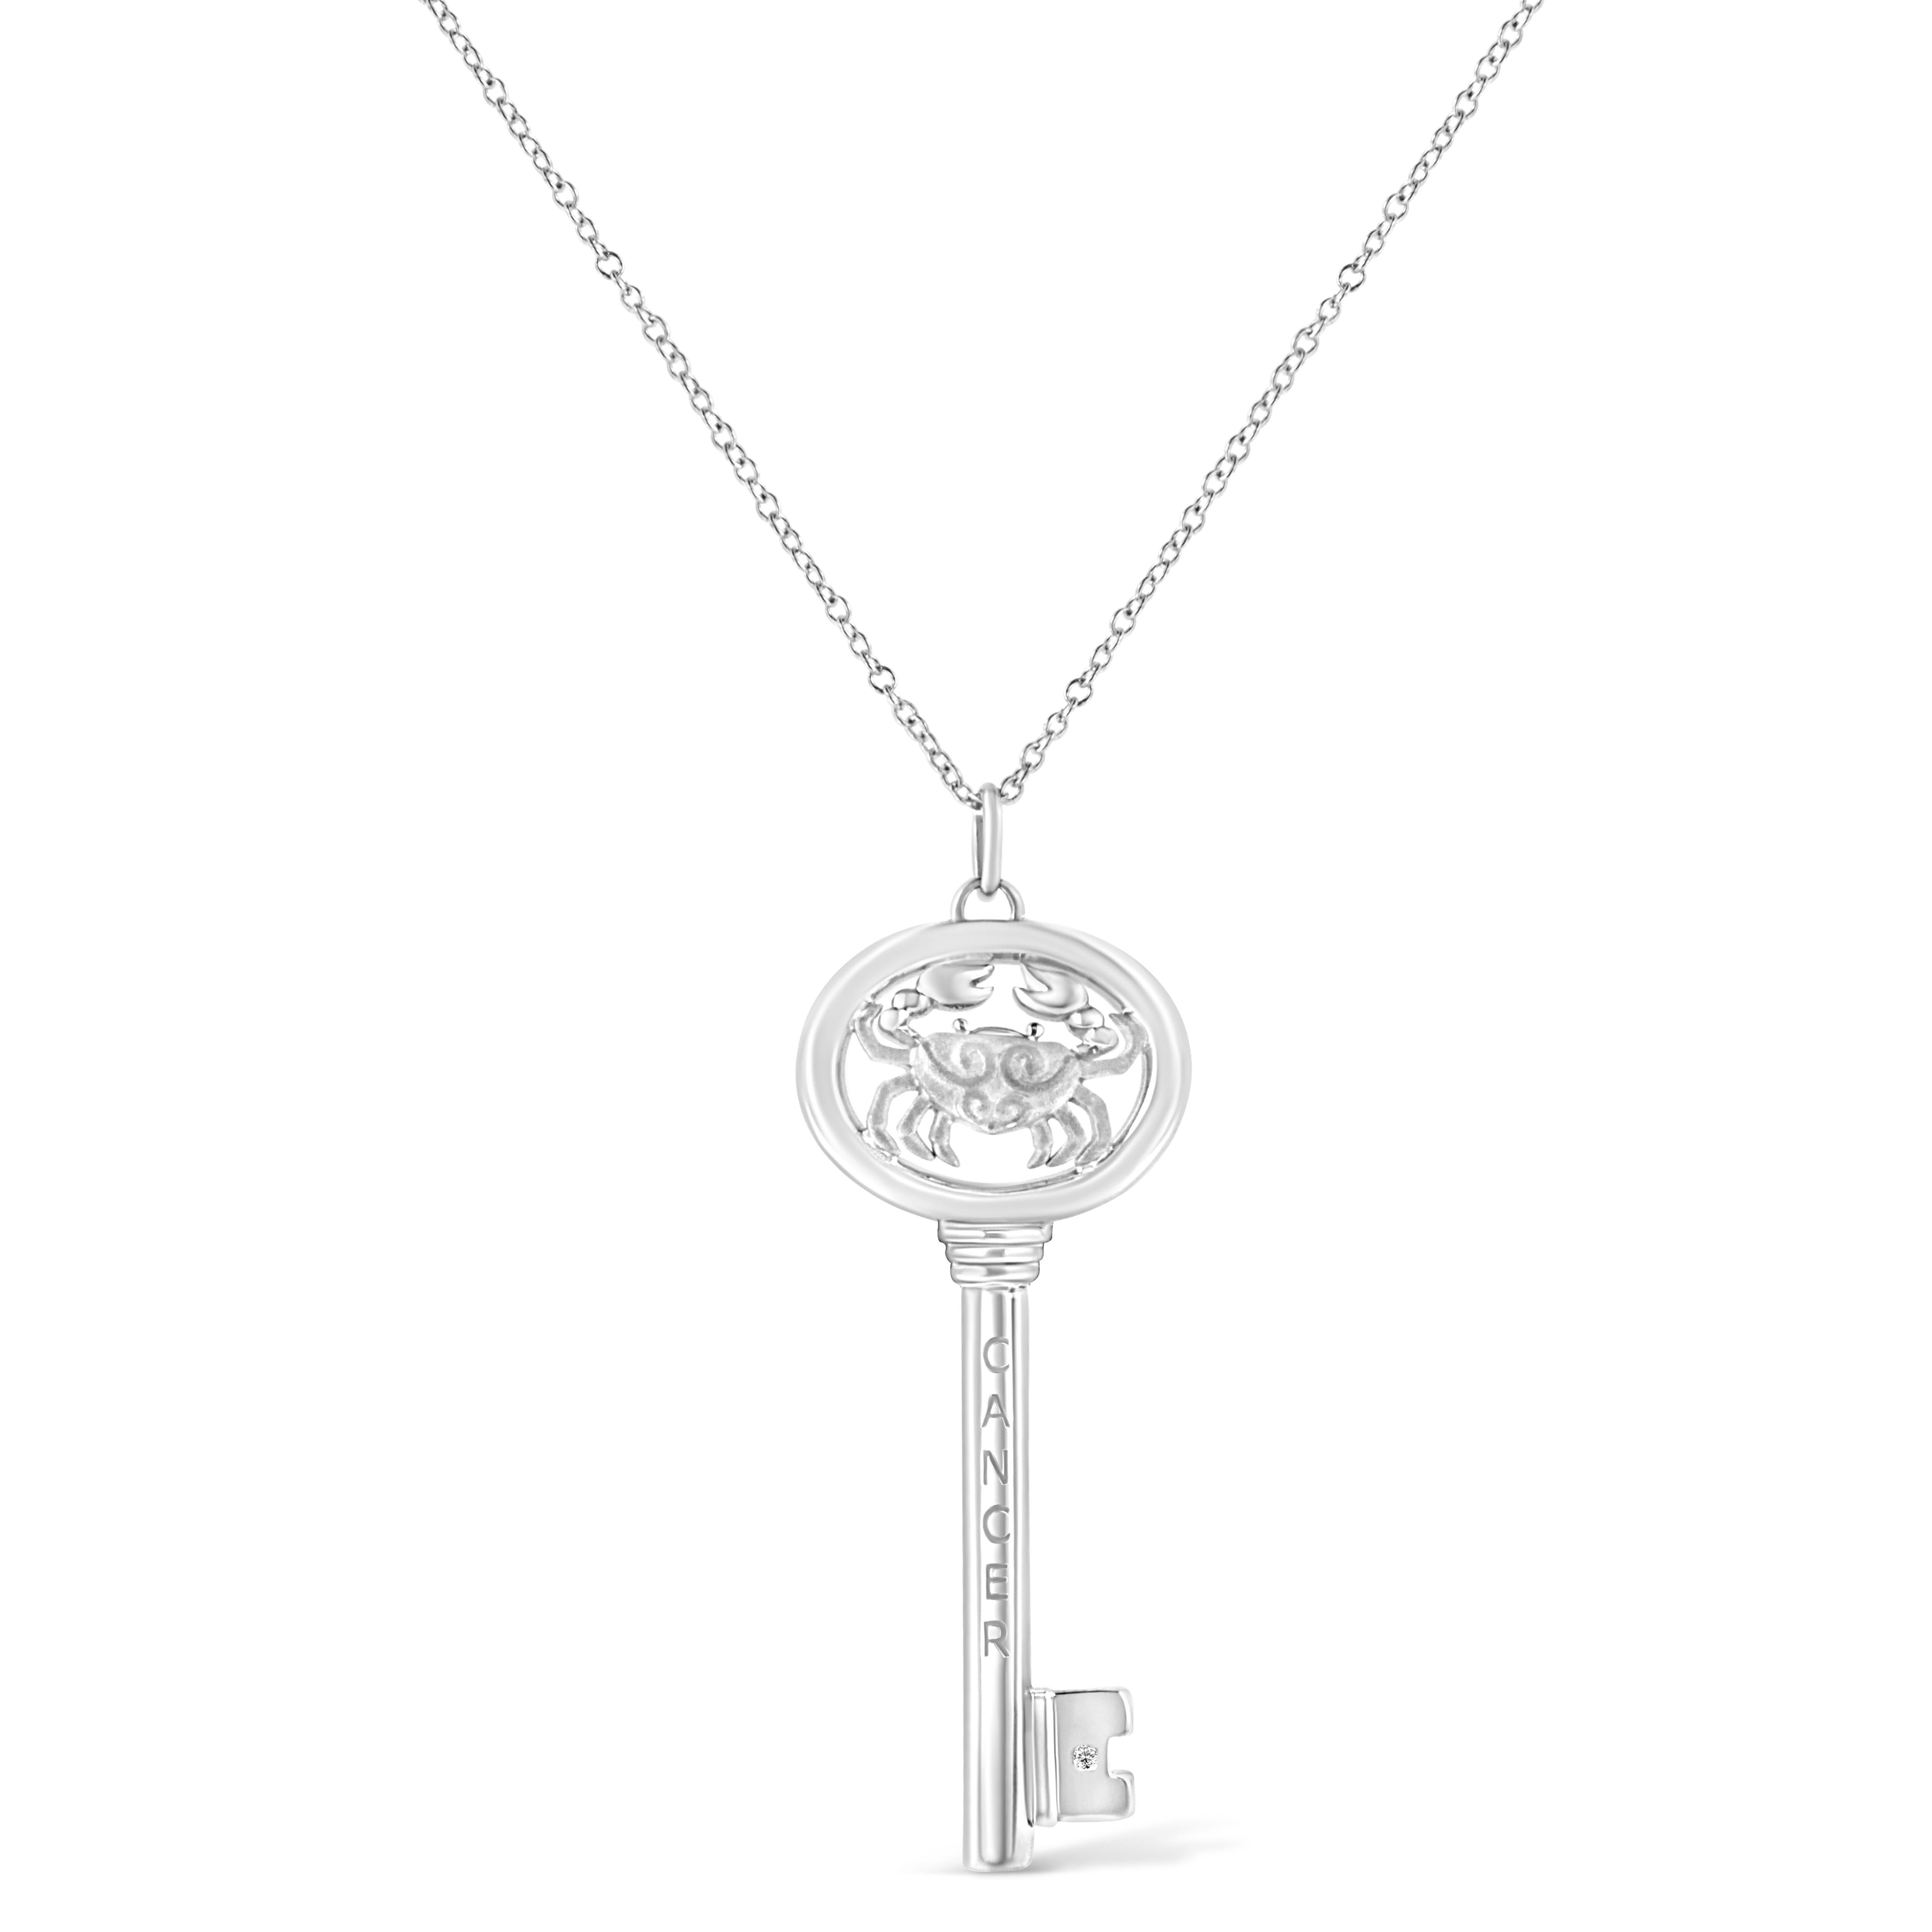 It's as if the stars aligned to create this stunning .925 Sterling Silver necklace flaunting a Cancer zodiac pendant accented by a glimmering bezel set natural diamond. Brilliant beacons of optimism and hope, our Zodiac Keys are radiant symbols of a